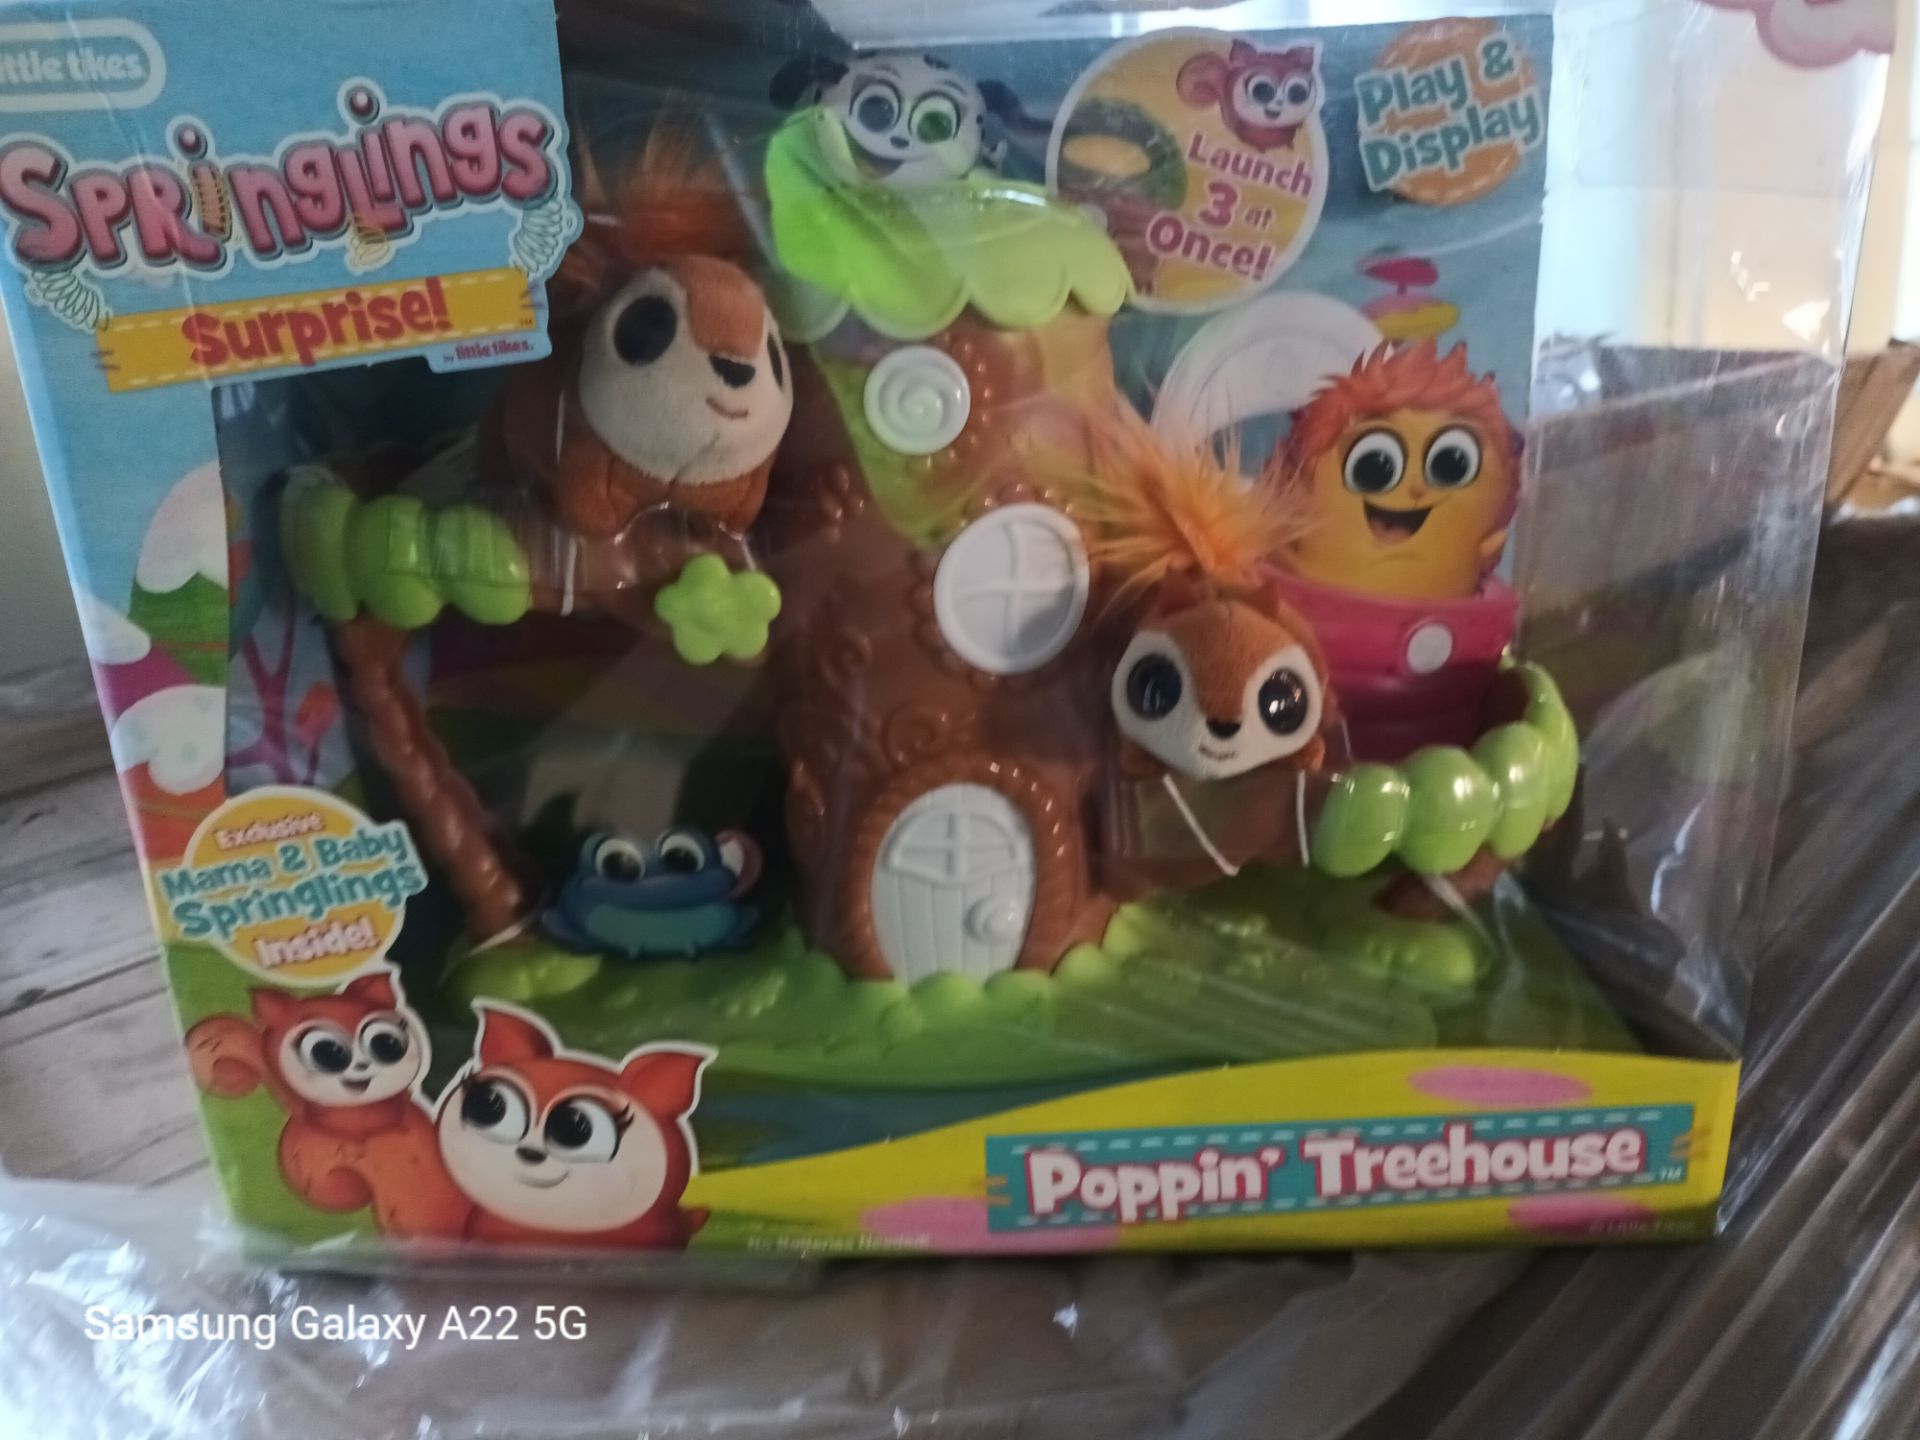 PALLET OF 72 SPRINGLINGS SUPRISE POPPING TREEHOUSE - Image 2 of 3